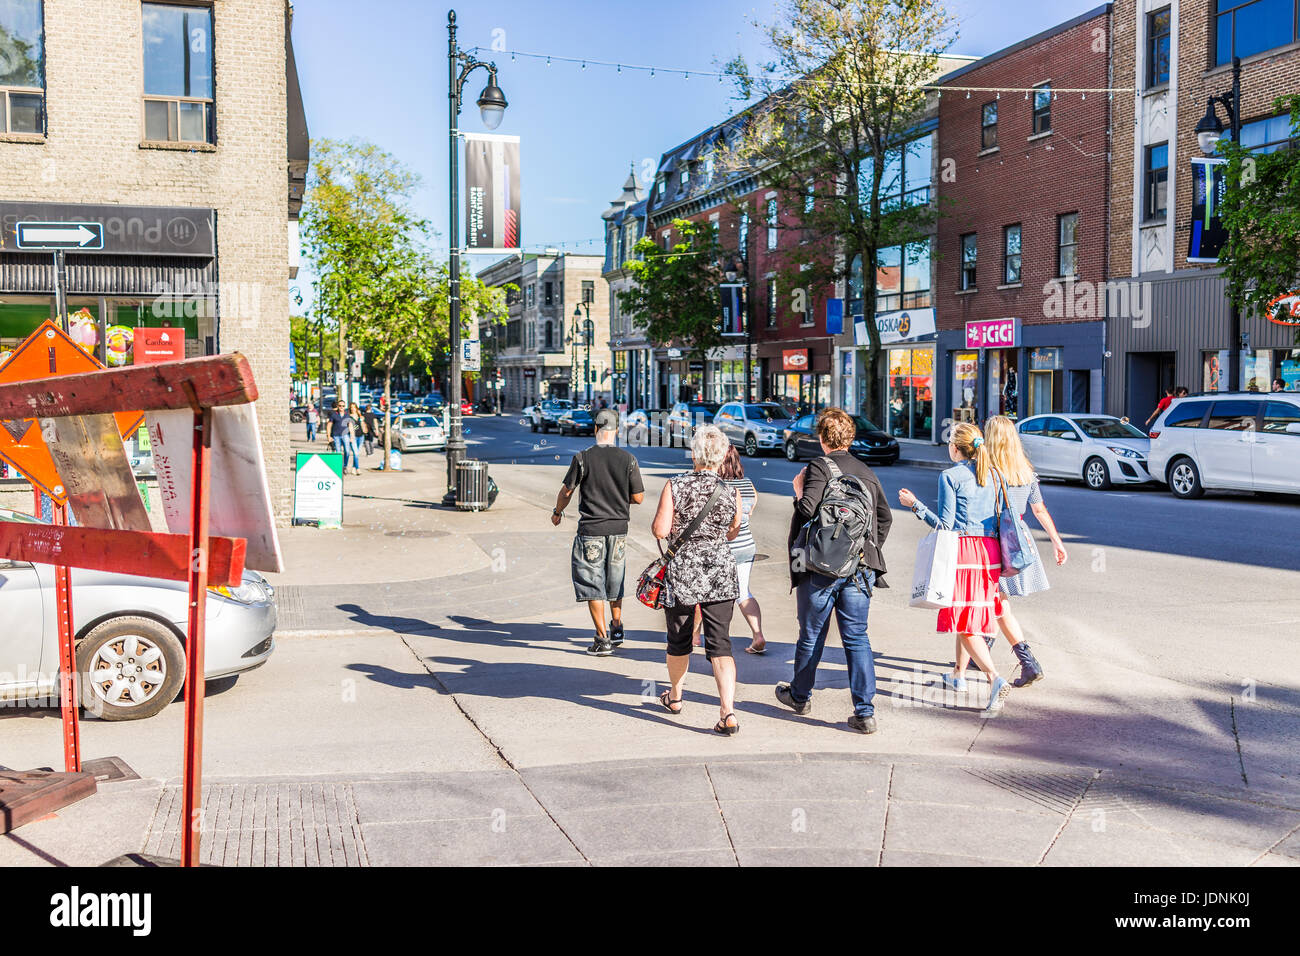 Montreal, Canada - May 27, 2017: People walking on Saint Laurent boulevard in Montreal's Plateau Mont Royal in Quebec region Stock Photo